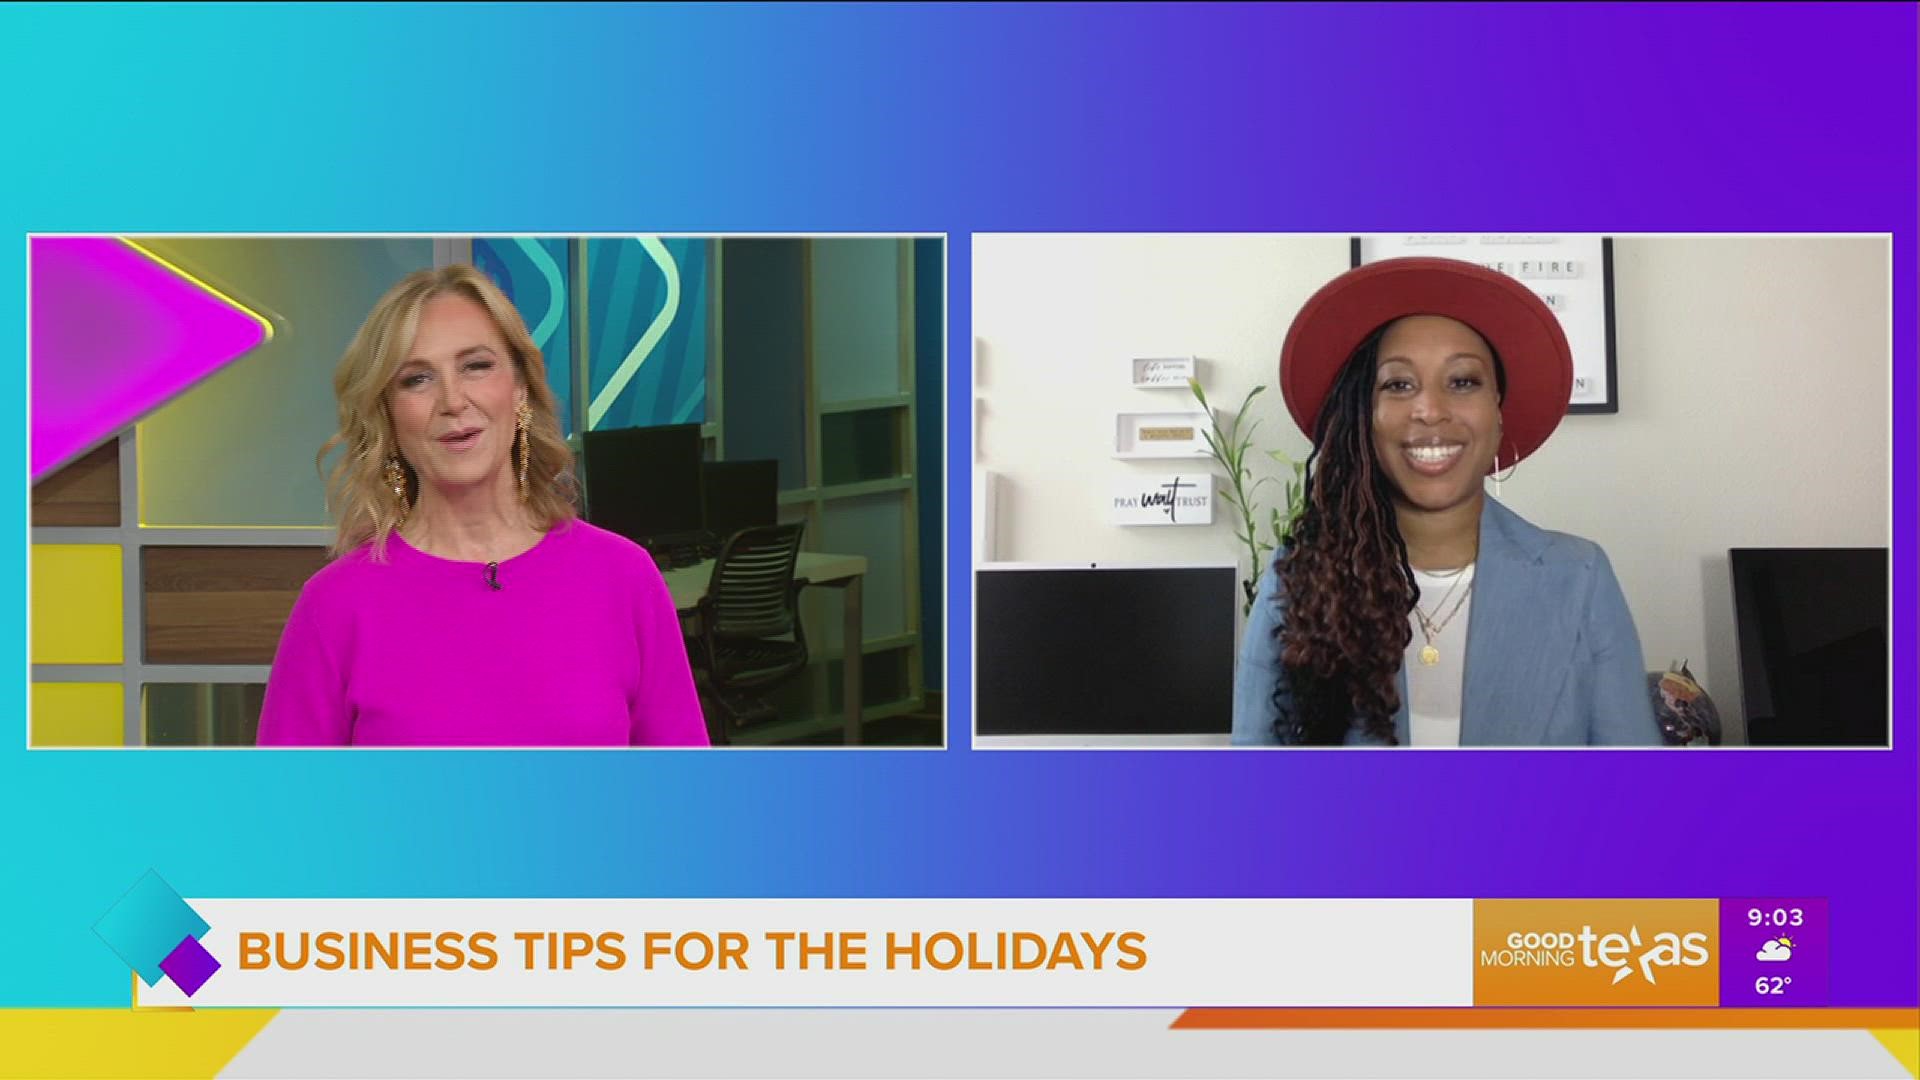 Saratta Murphy shares tips business owners can use to prepare for the busy holiday season.